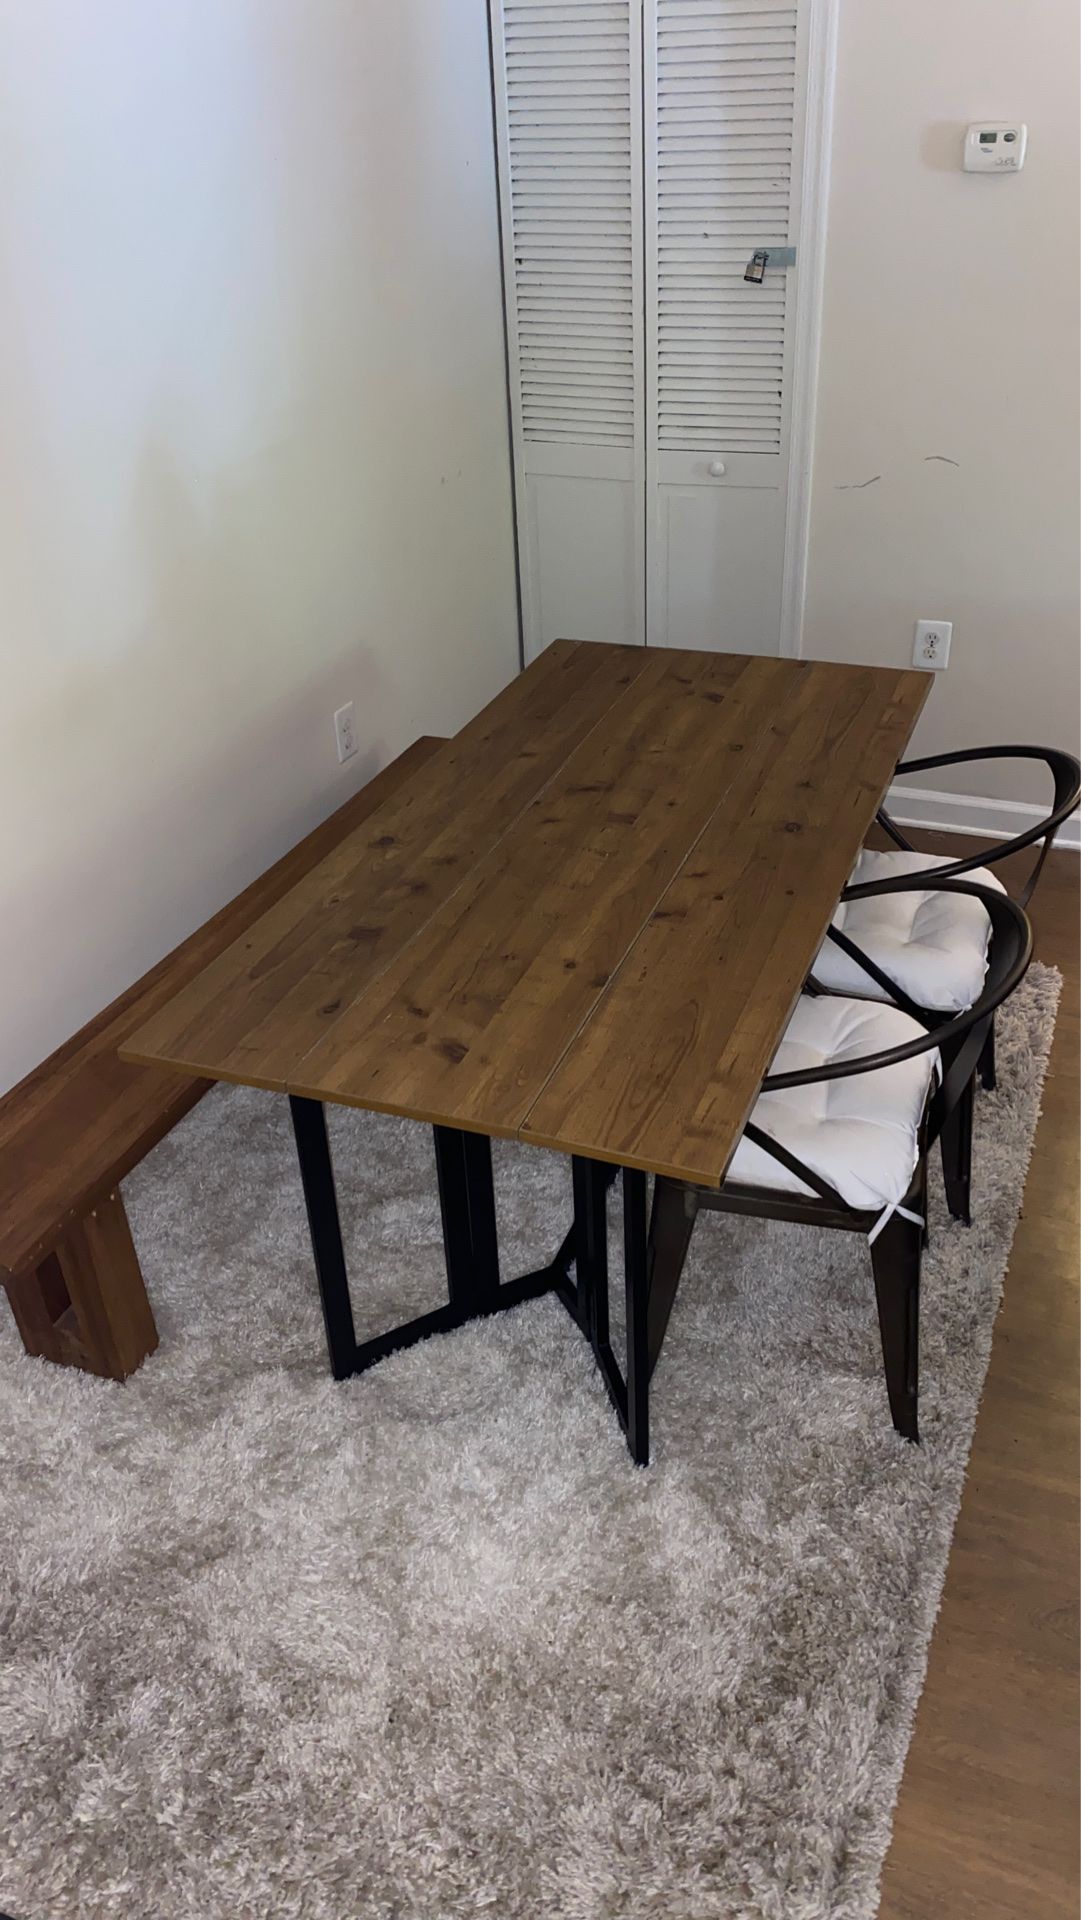 Wooden dining/ kitchen table